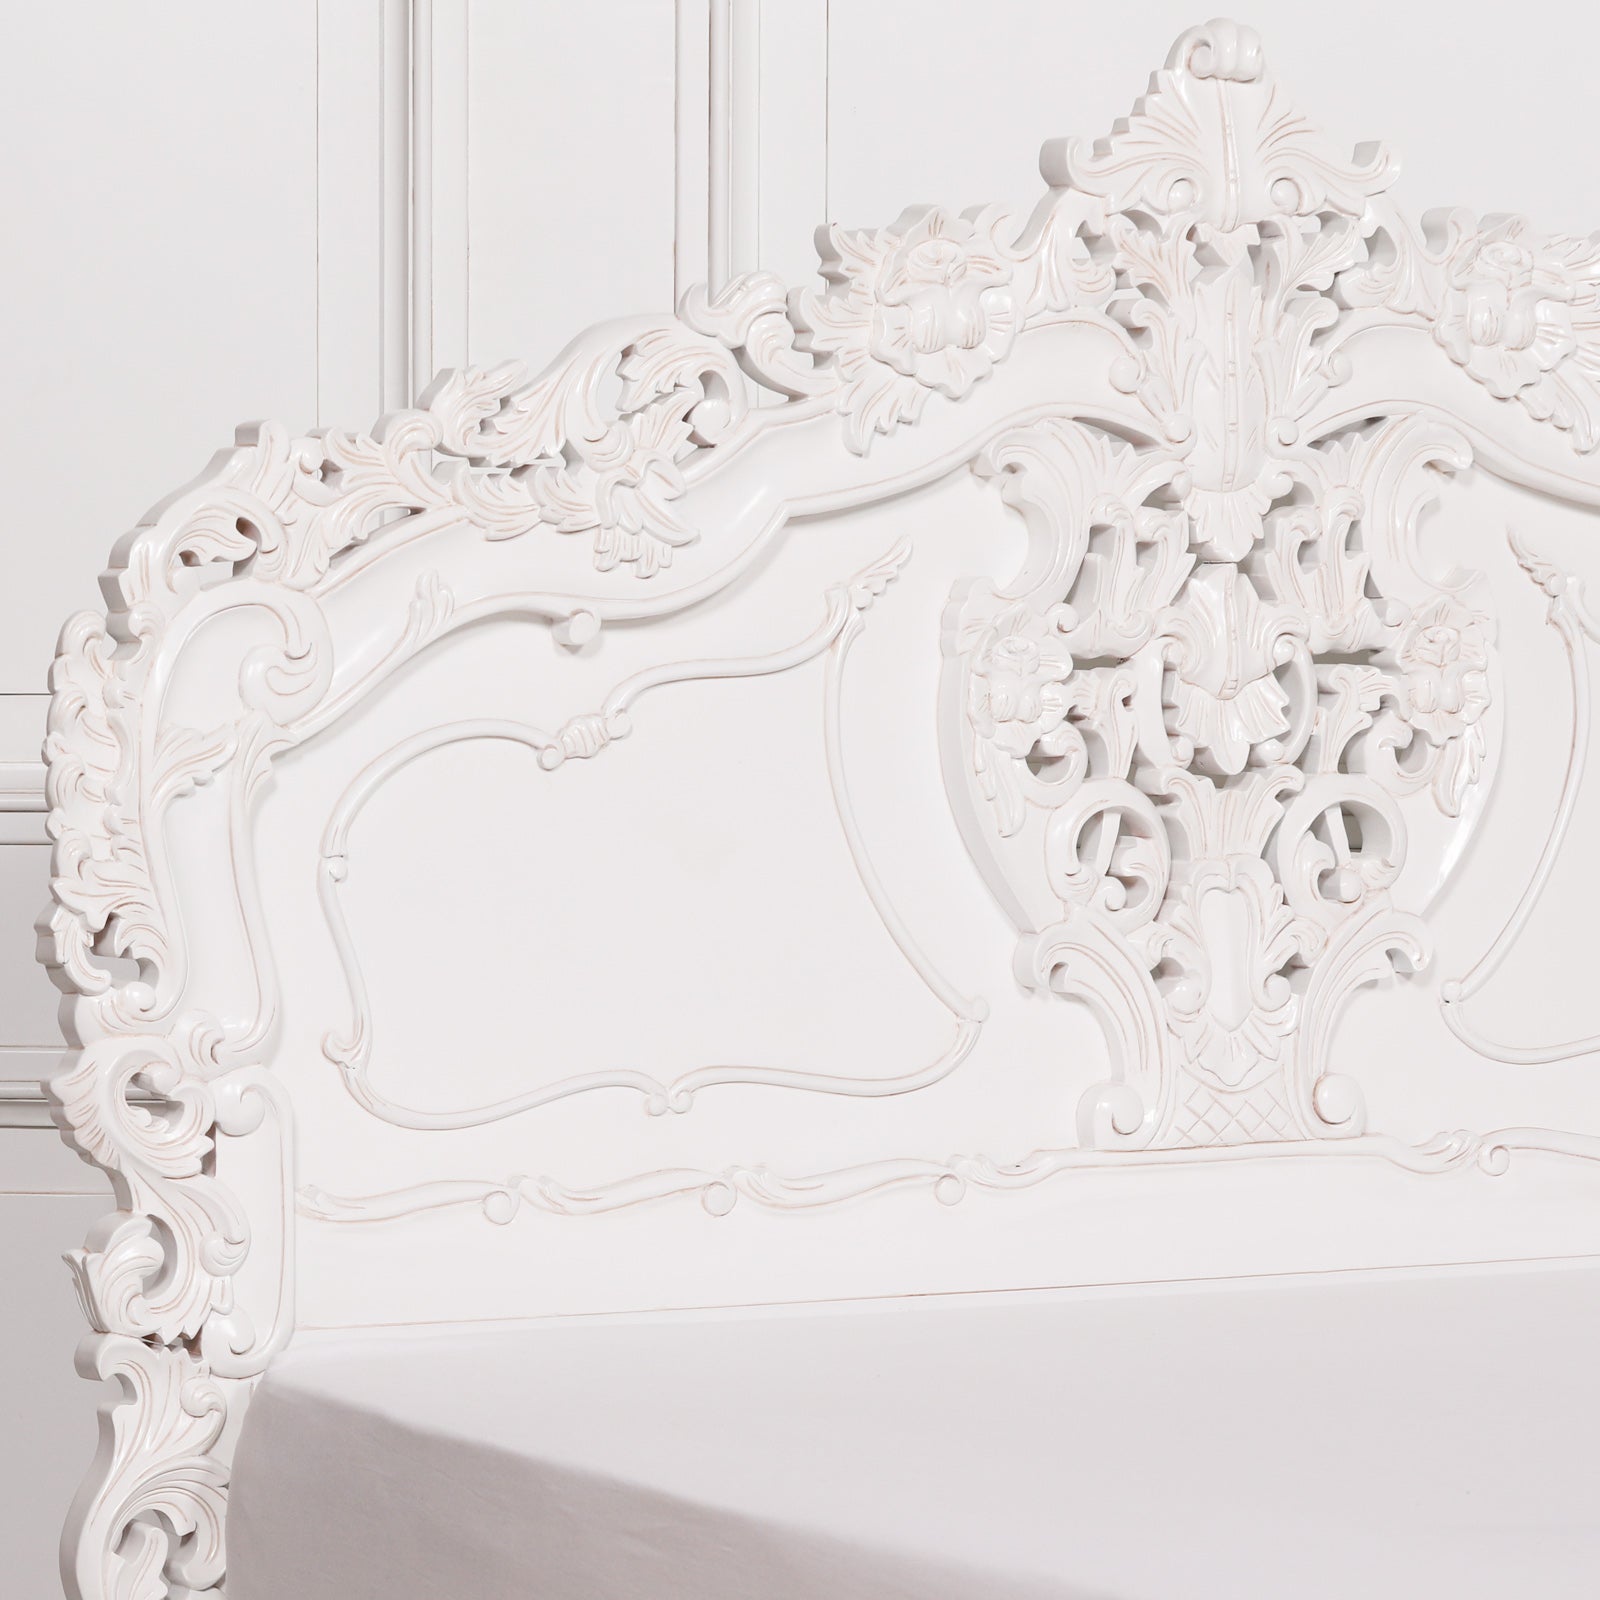 Rococo 4ft6 Double Size Carved Bed